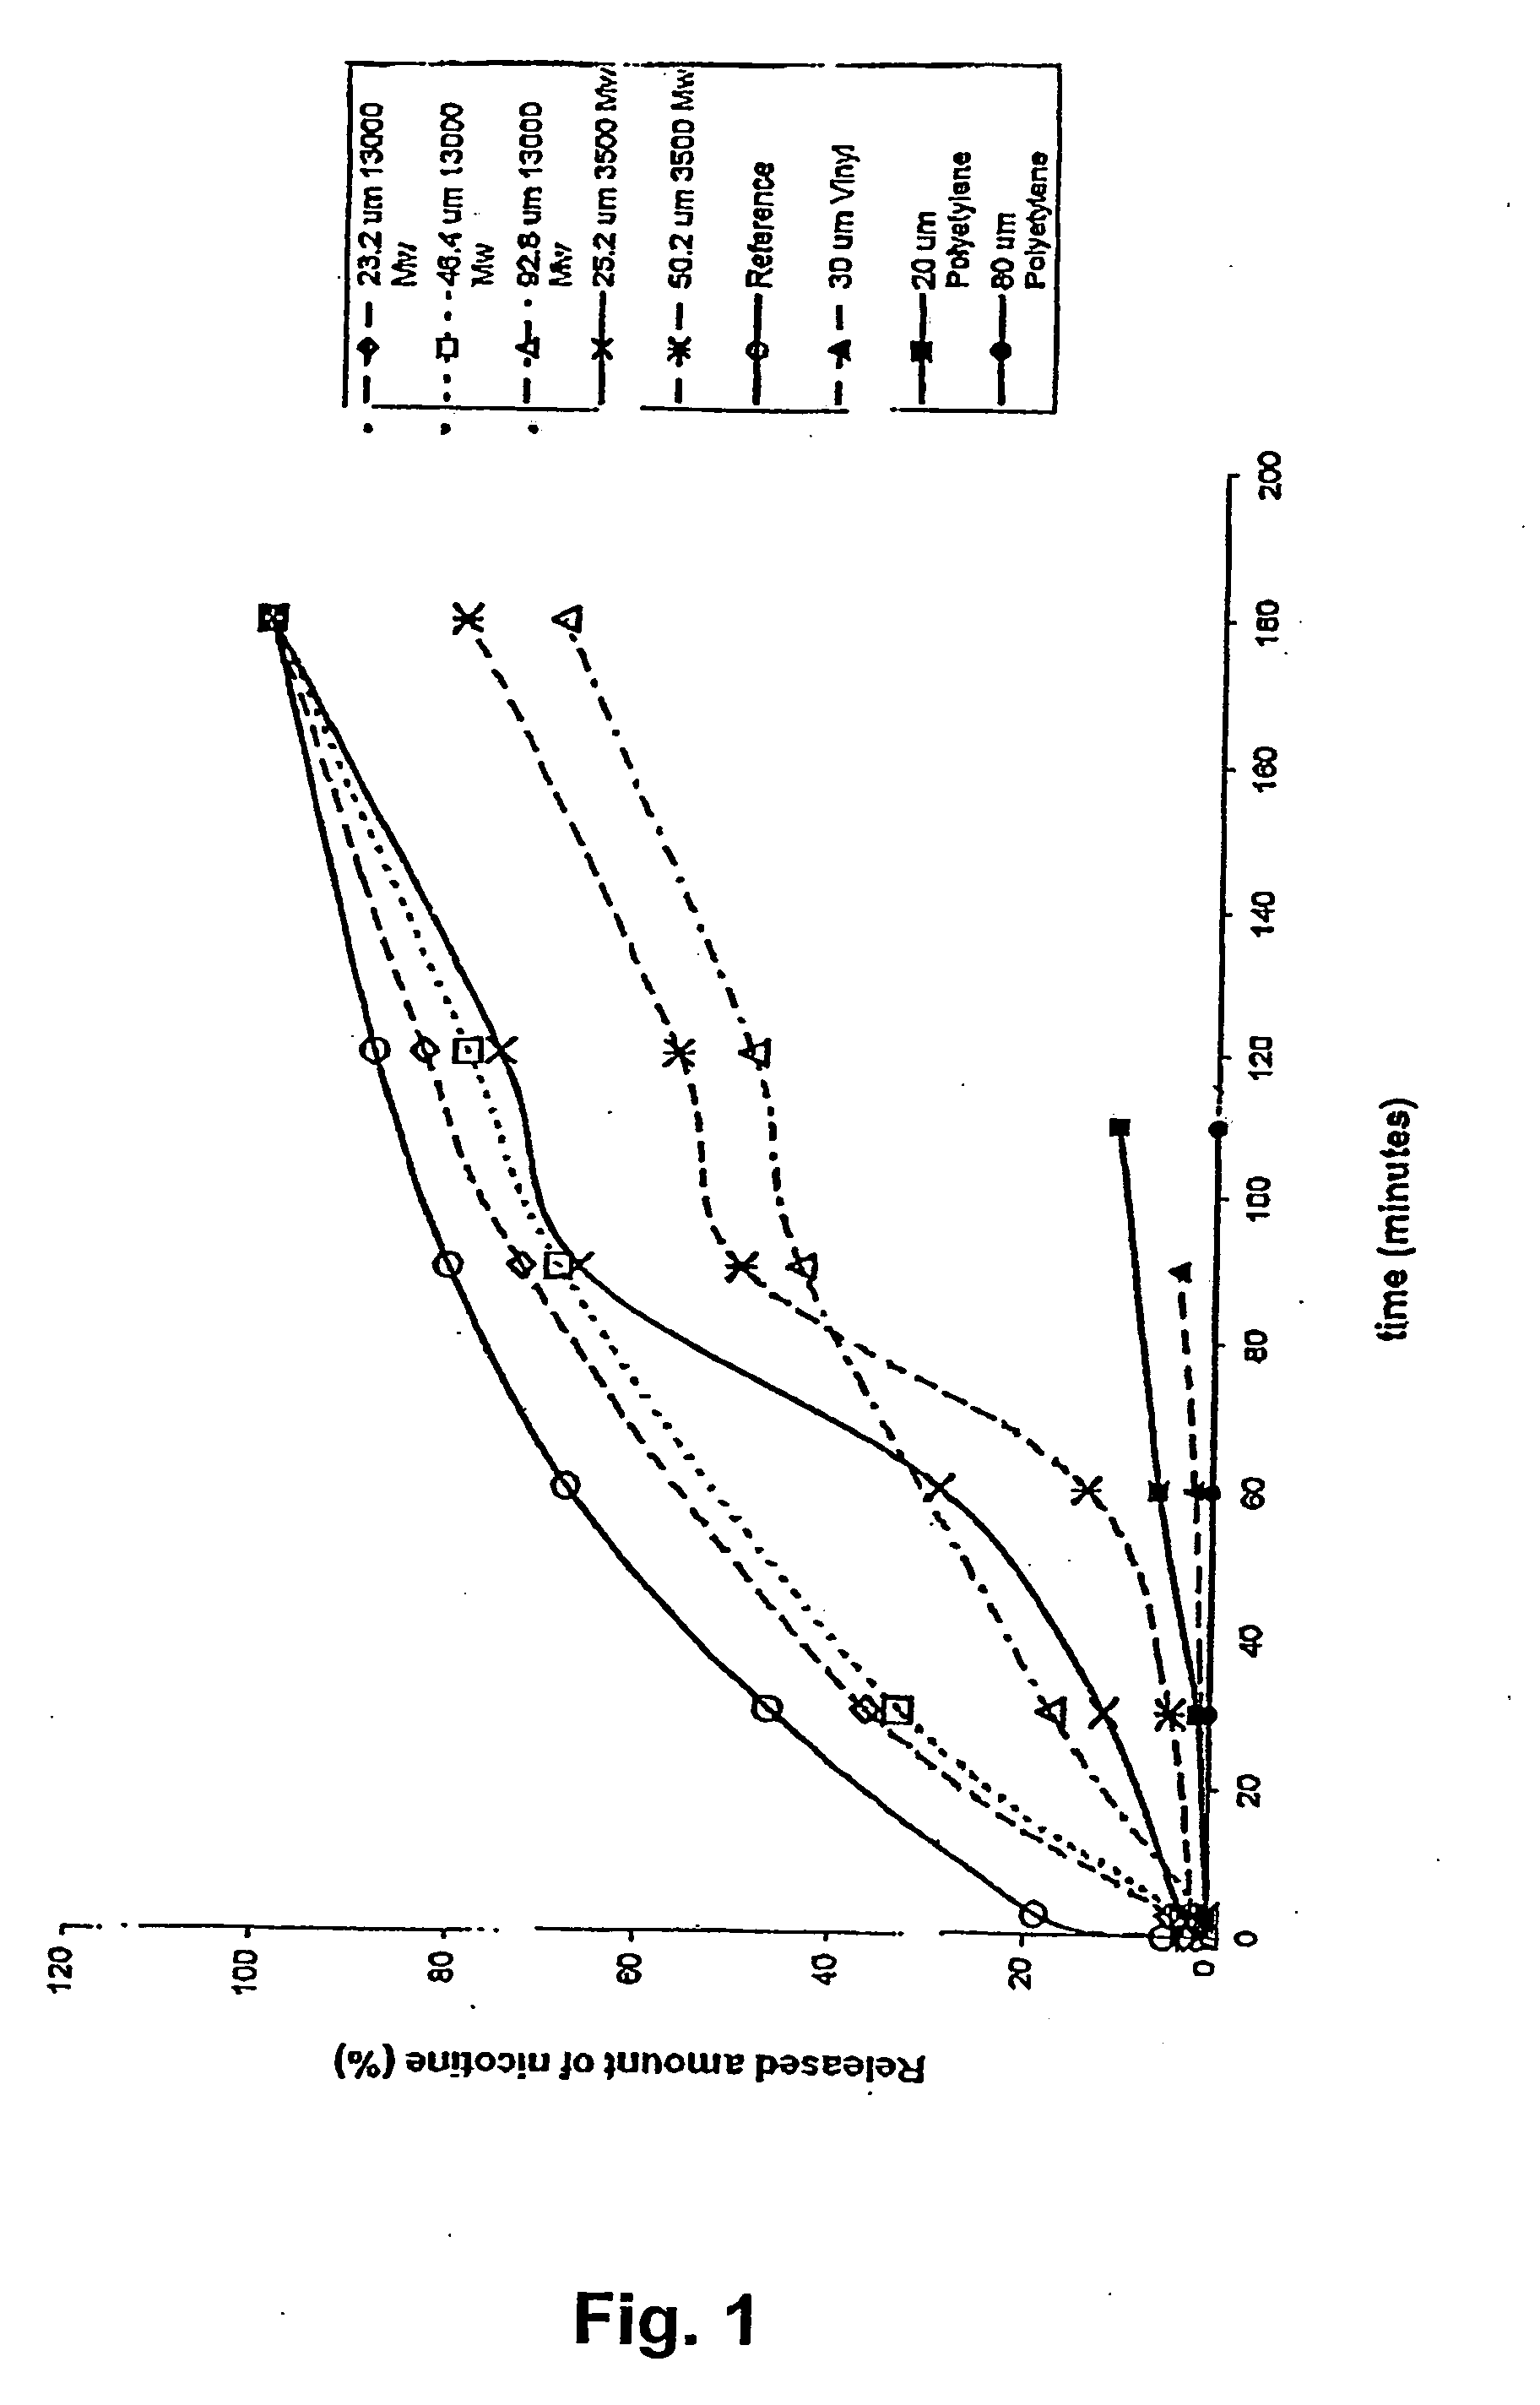 Tobacco and/or tobacco substitute composition for use as a snuff in the oral cavity